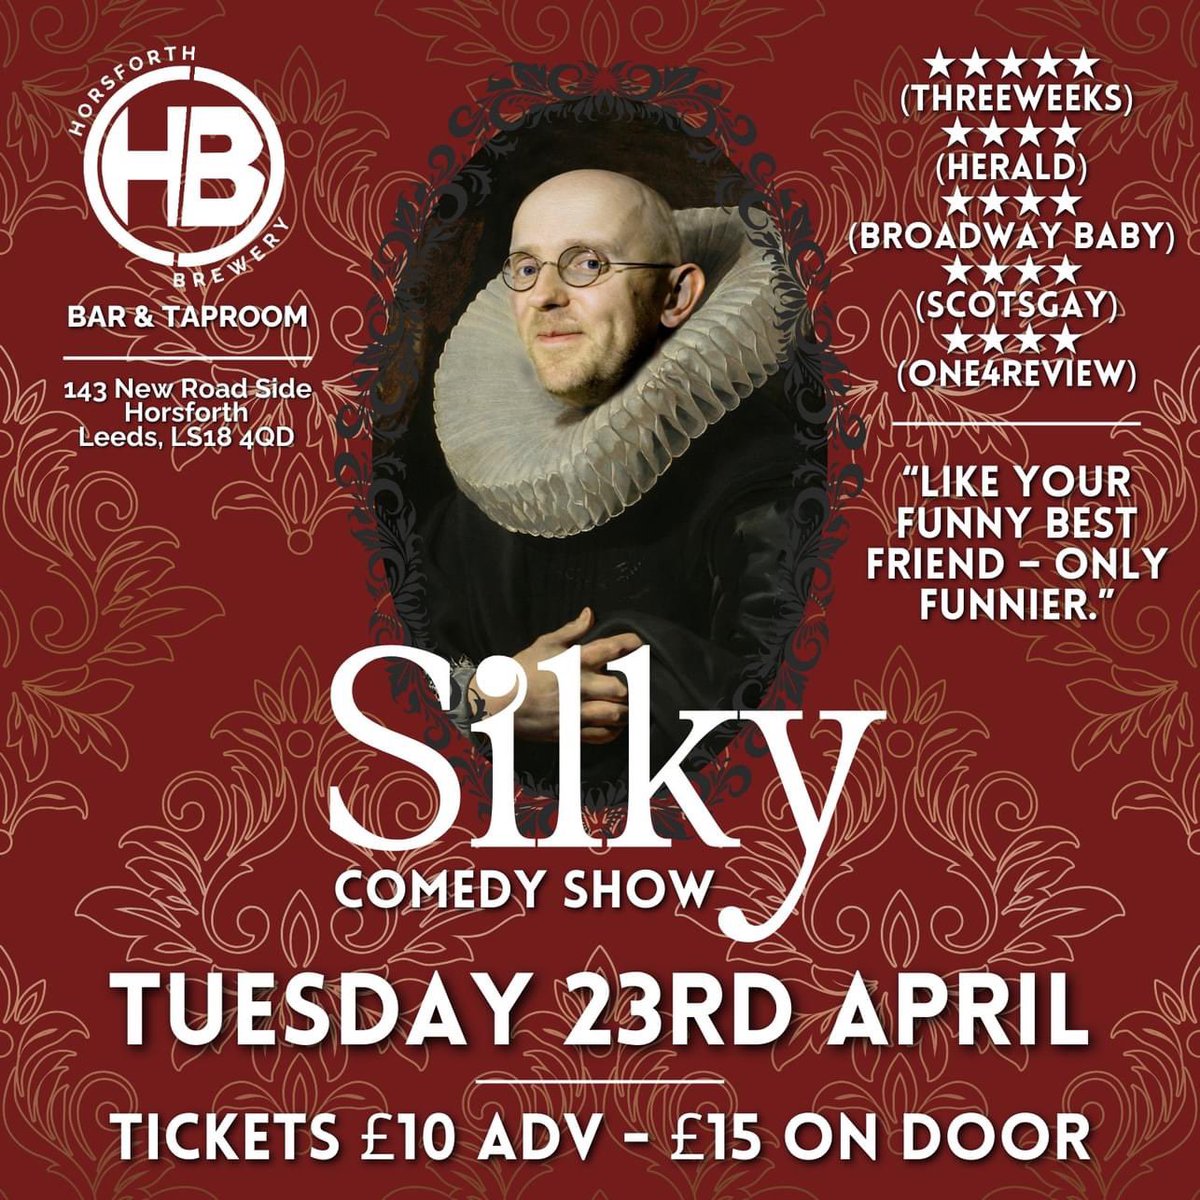 Reminder that on Tuesday the 23rd we have Leeds legend @paulsilkywhite performing! We have the last few tickets available here - horsforthbrewery.co.uk/collections/ti… - £11 advance, £15 on the door